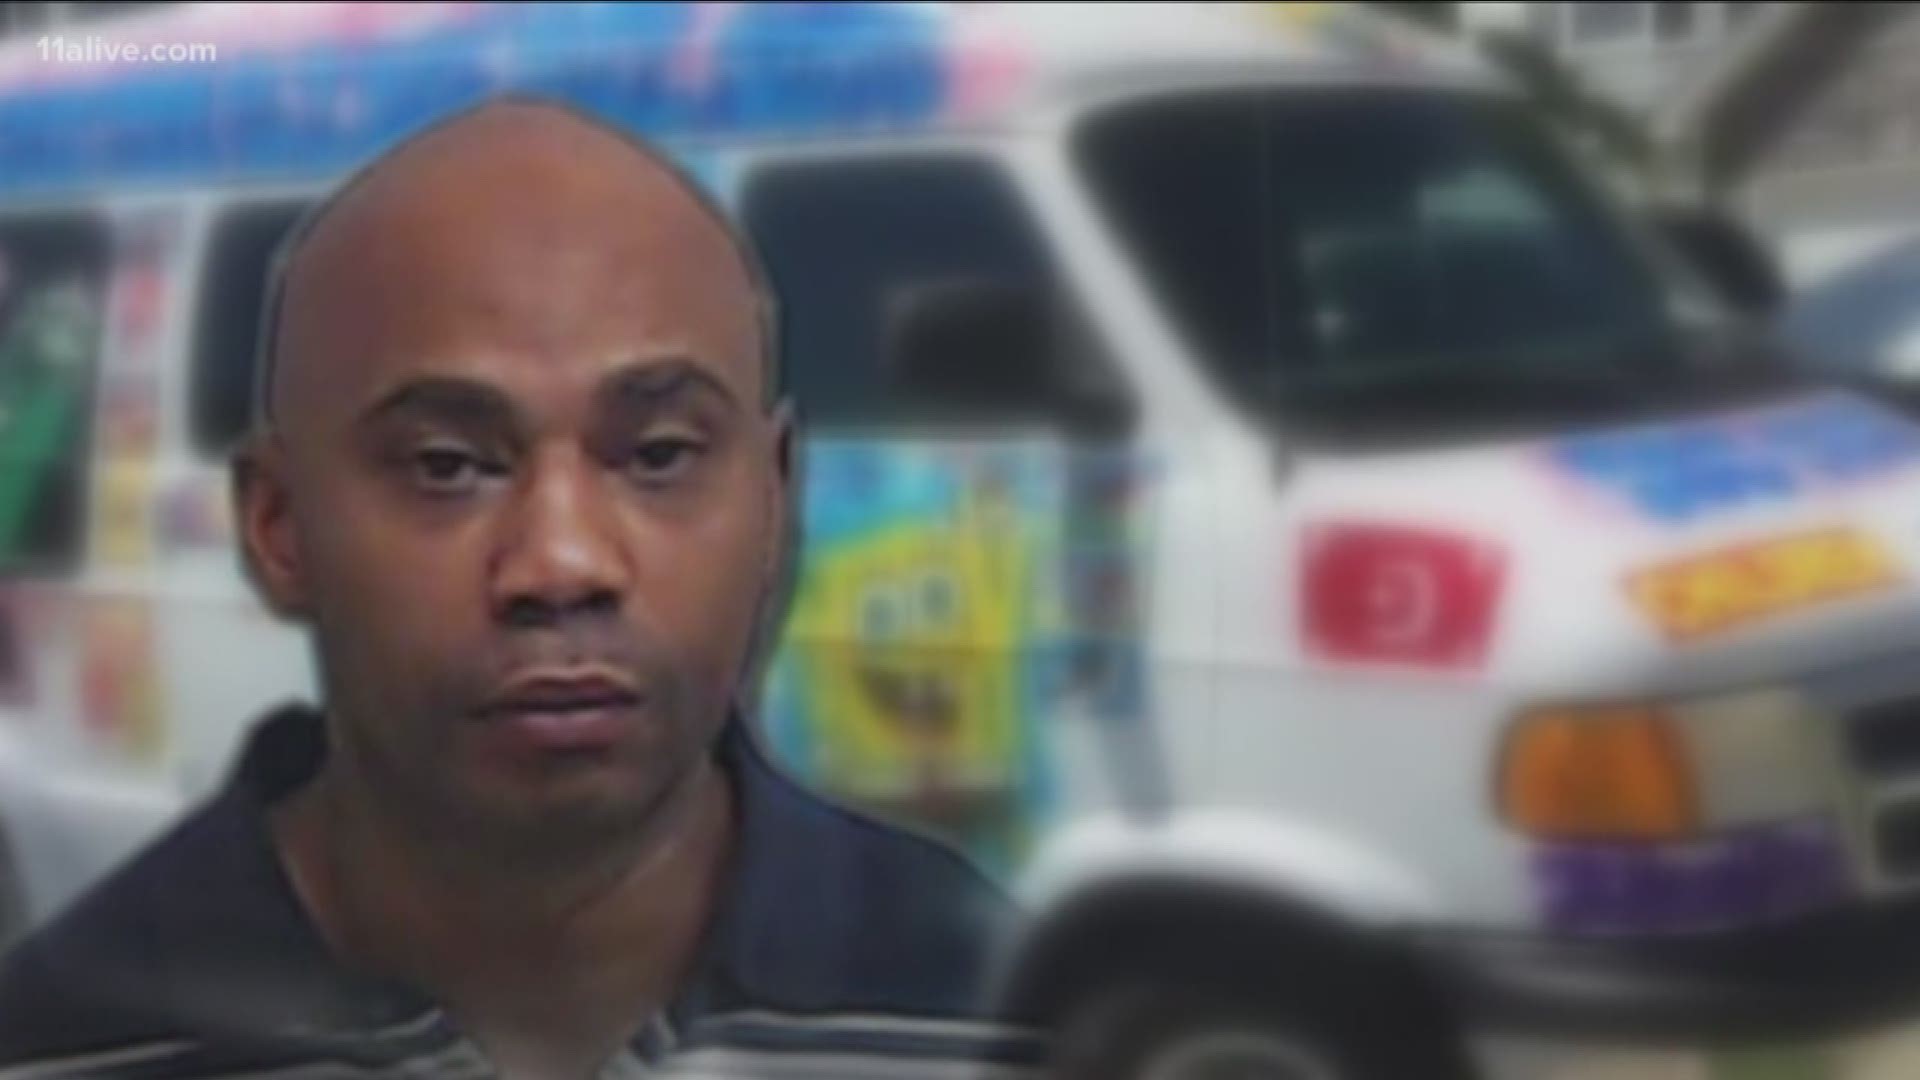 A man convicted of raping and molesting a 14-year-old girl inside his ice cream truck will spend 25 years in prison.